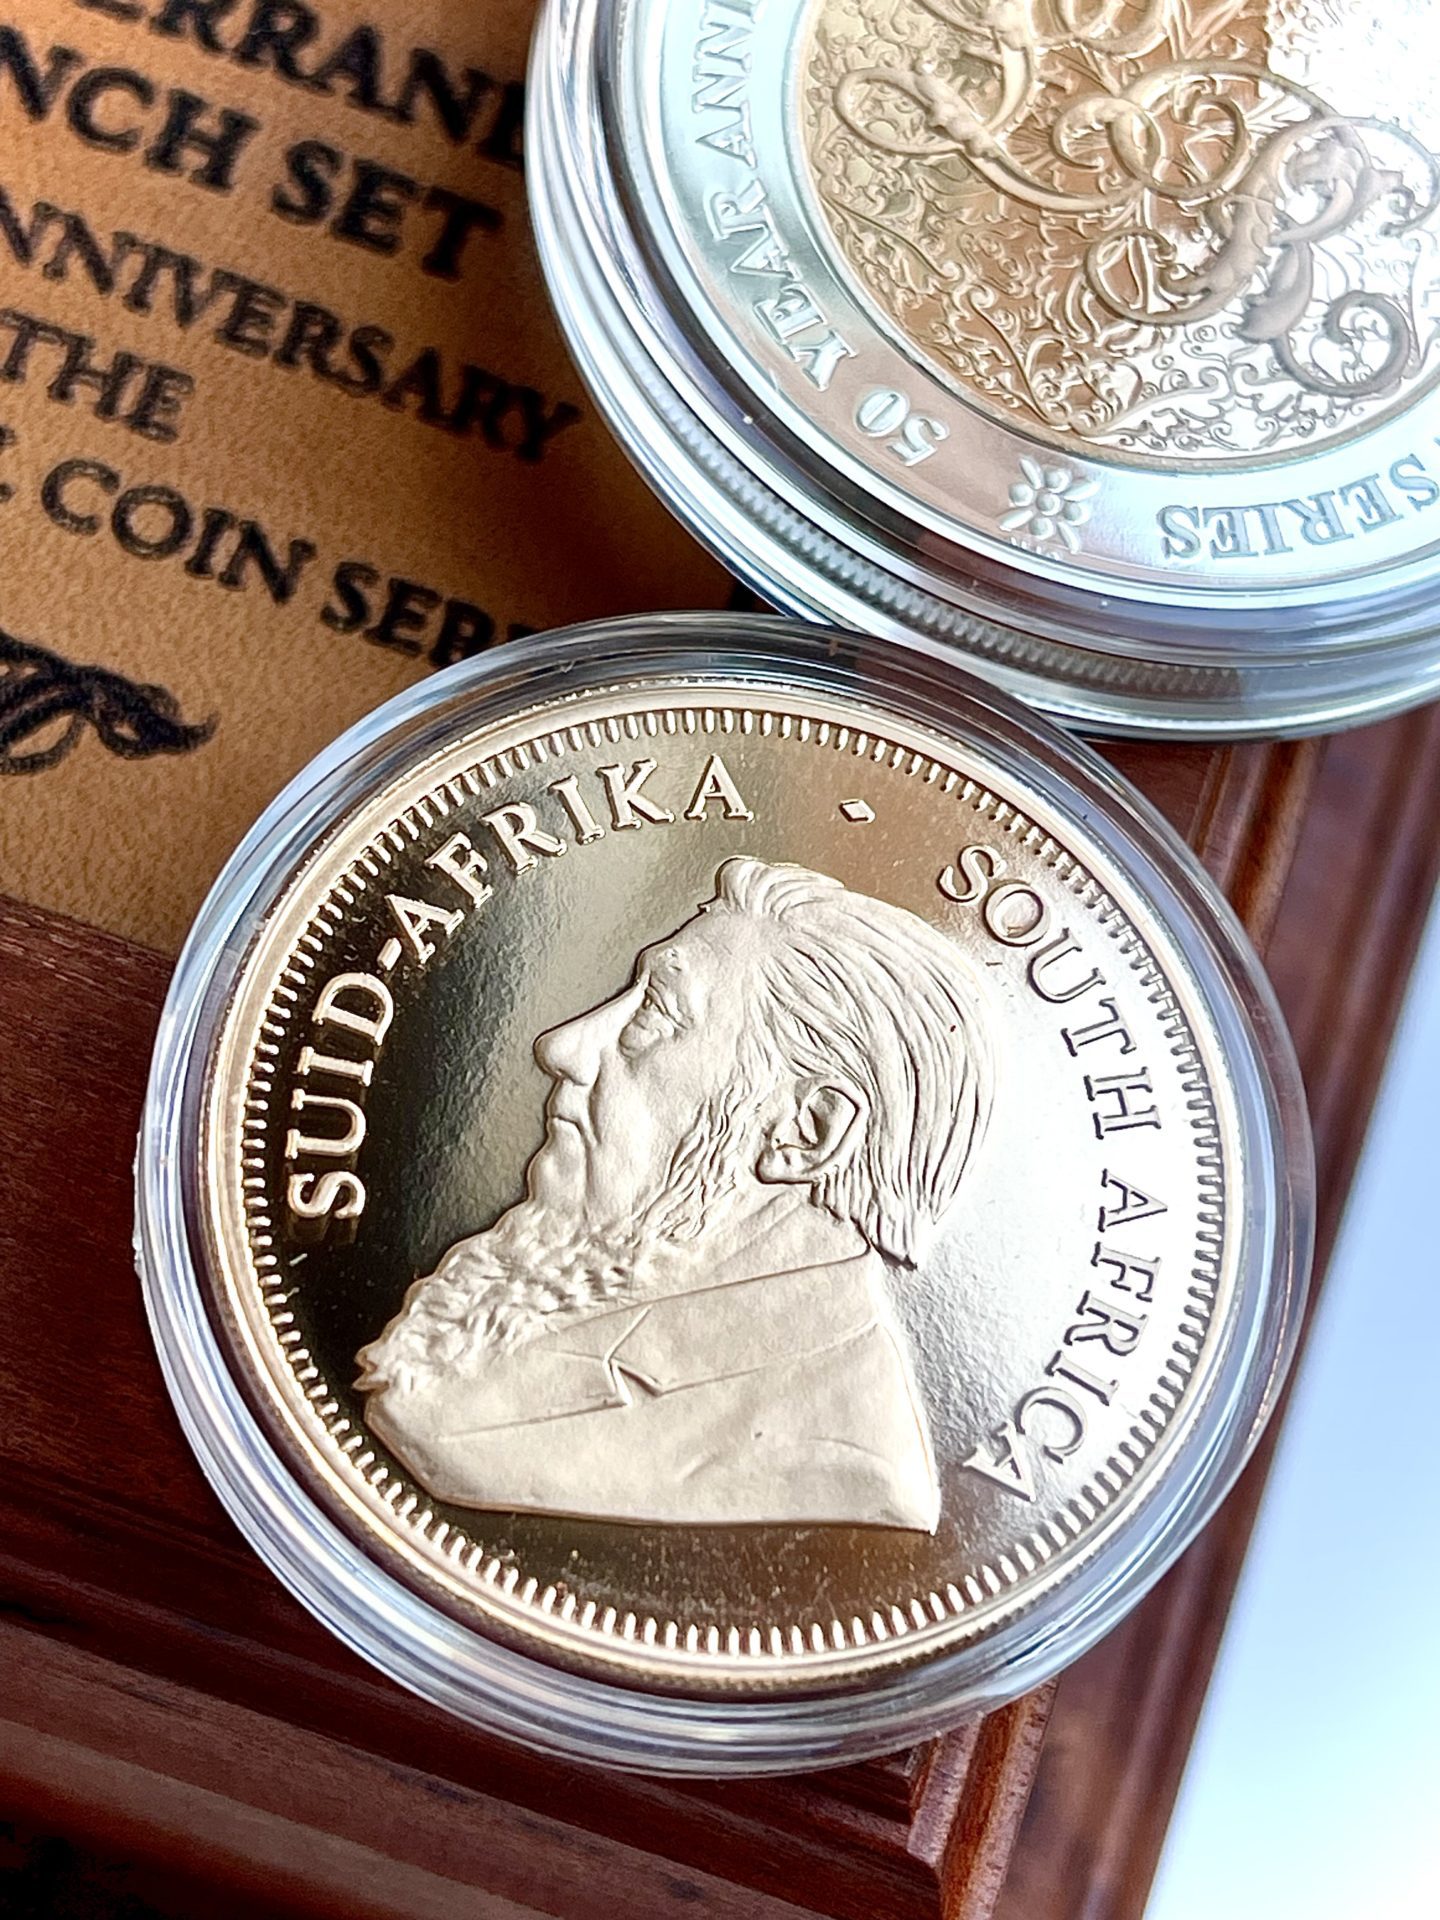 South Africa Krugerrand 2011 Mintmark 50 years decimal coin series